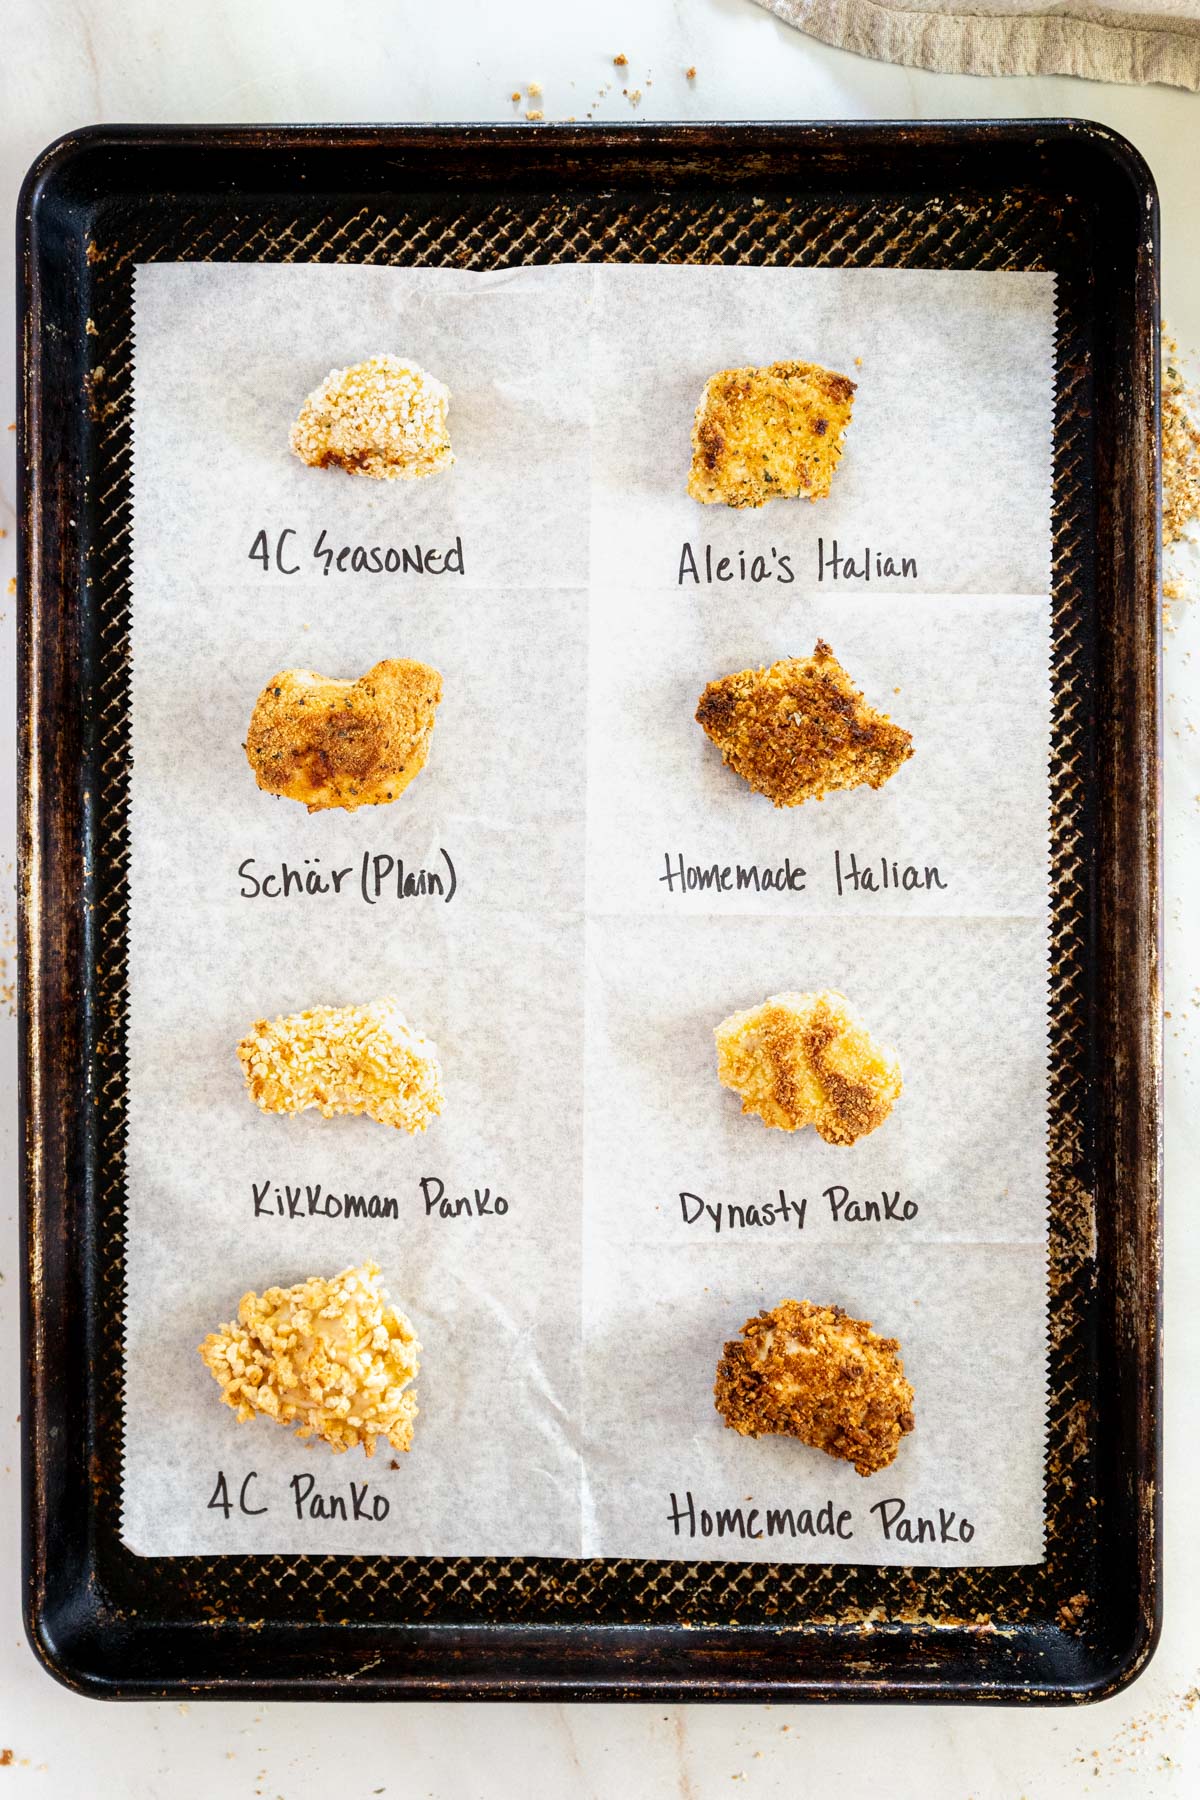 Chicken nuggets with different bread crumb coatings on a sheet pan.